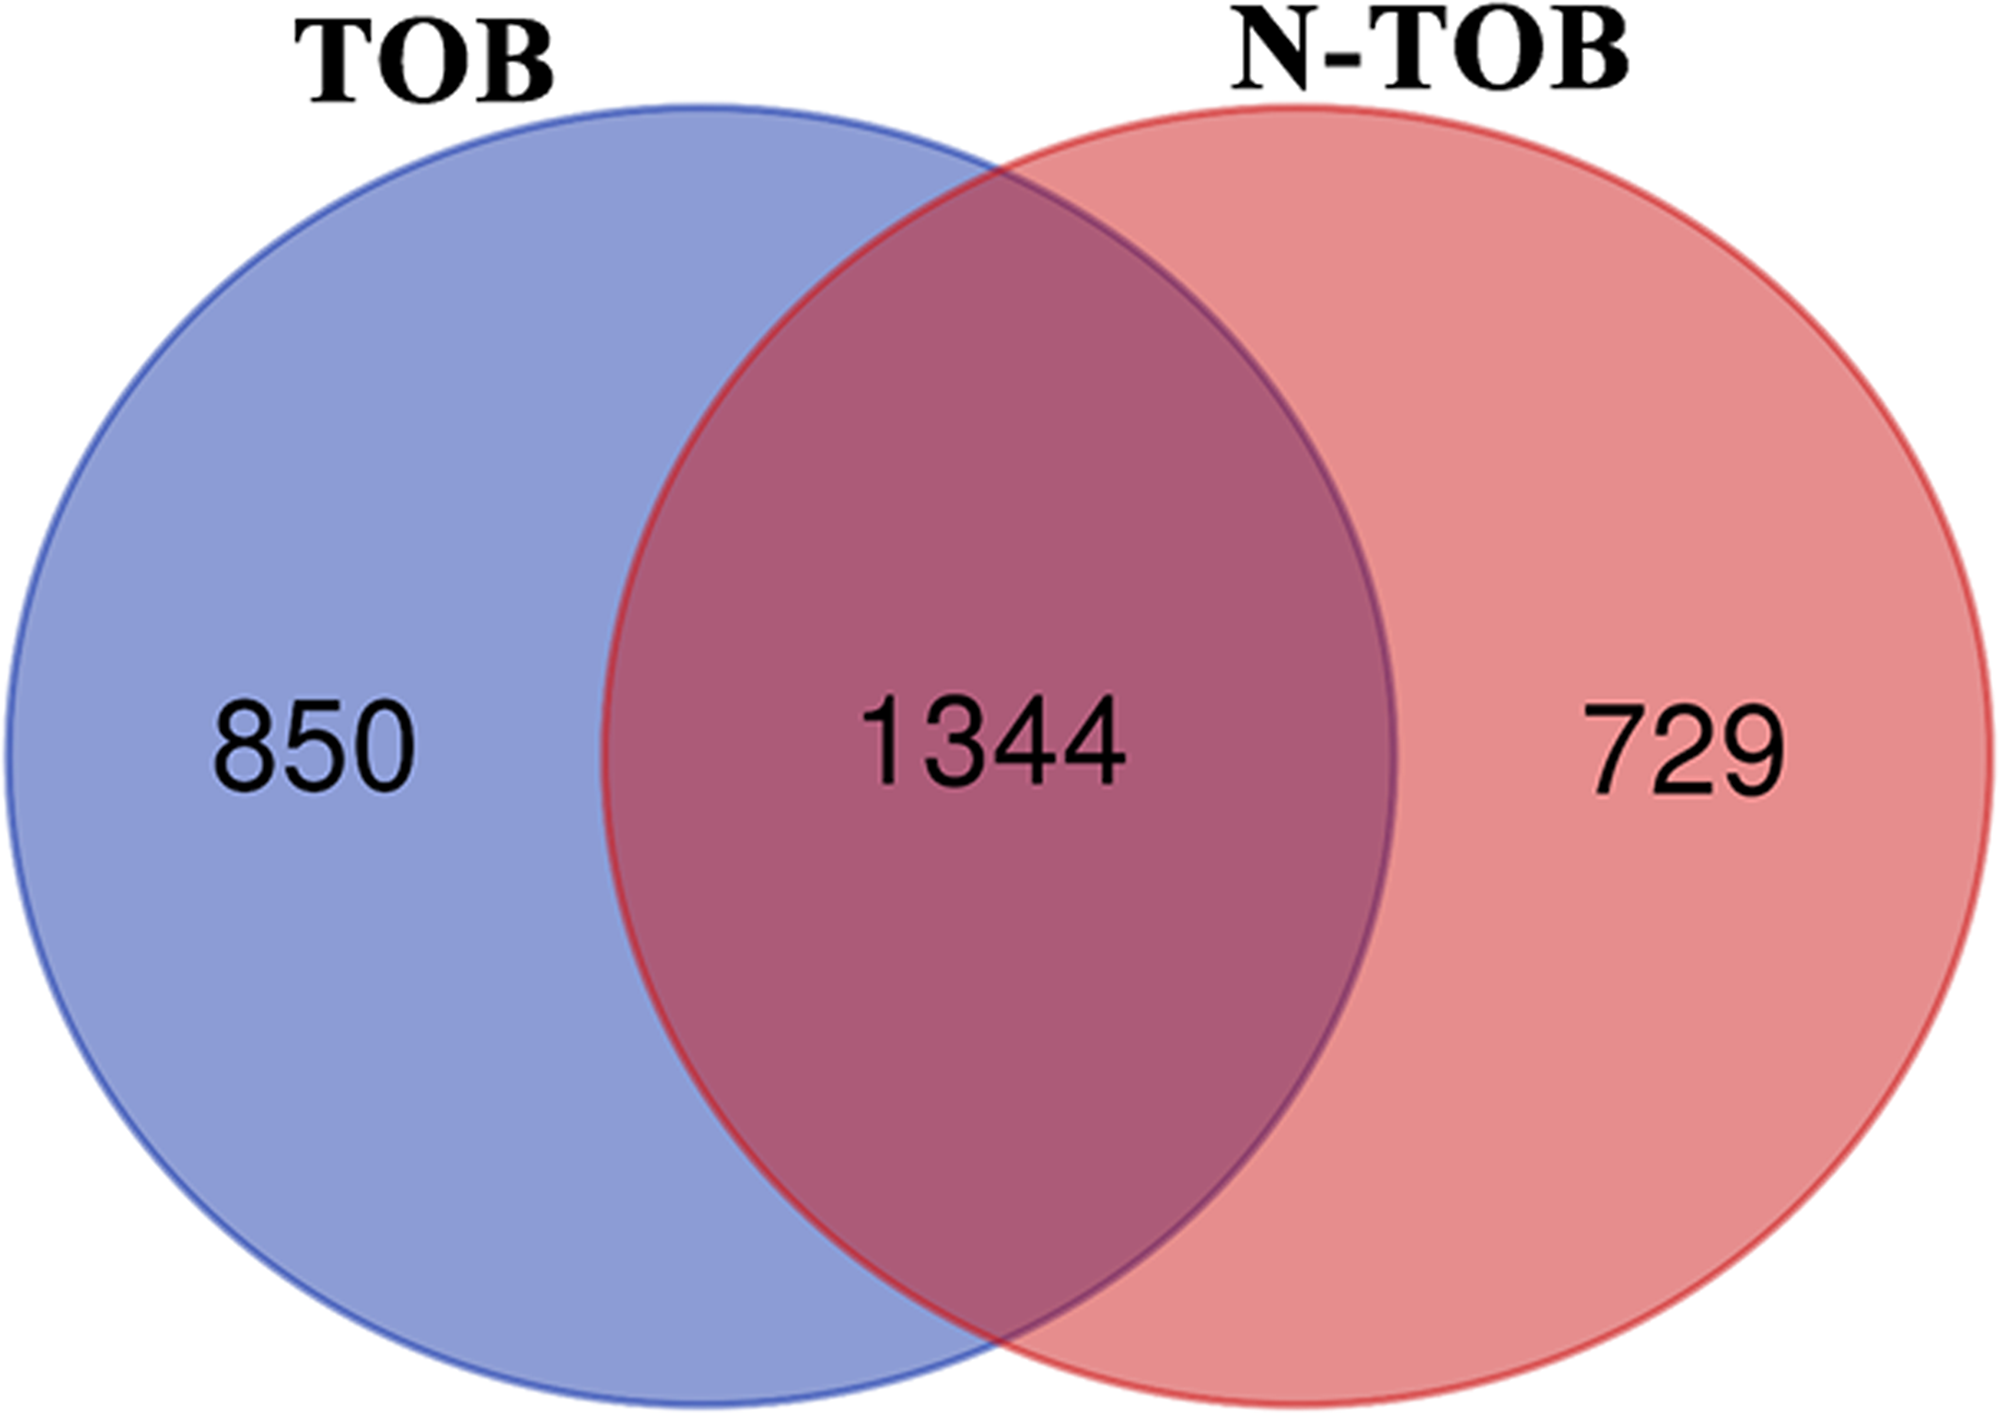 Venn diagram showing DEGs common and unique between Tobacco and non-Tobacco patients.